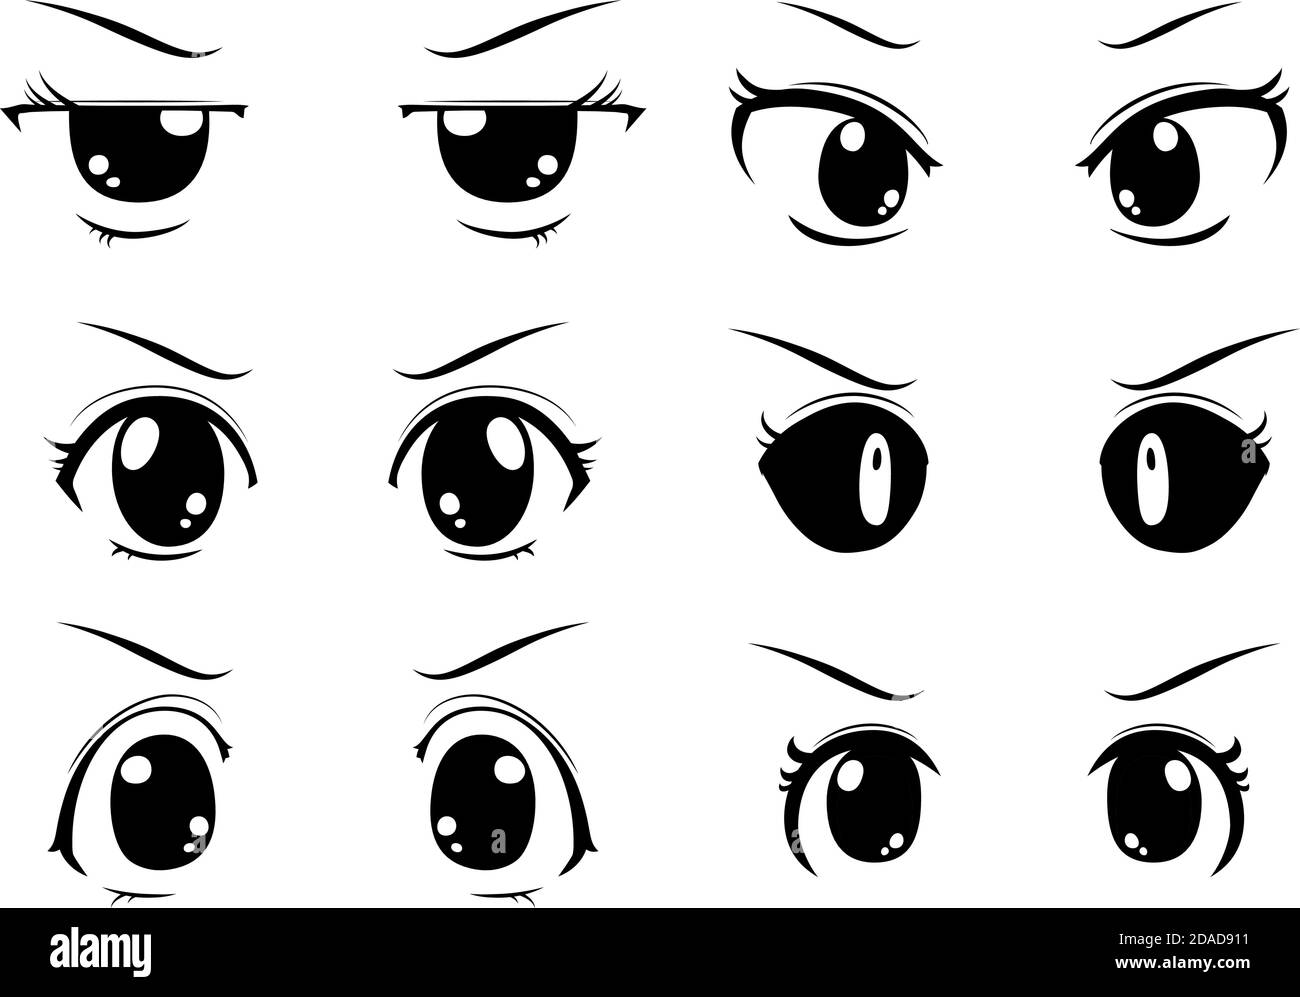 36,020 Anime Eyes Images, Stock Photos, 3D objects, & Vectors | Shutterstock